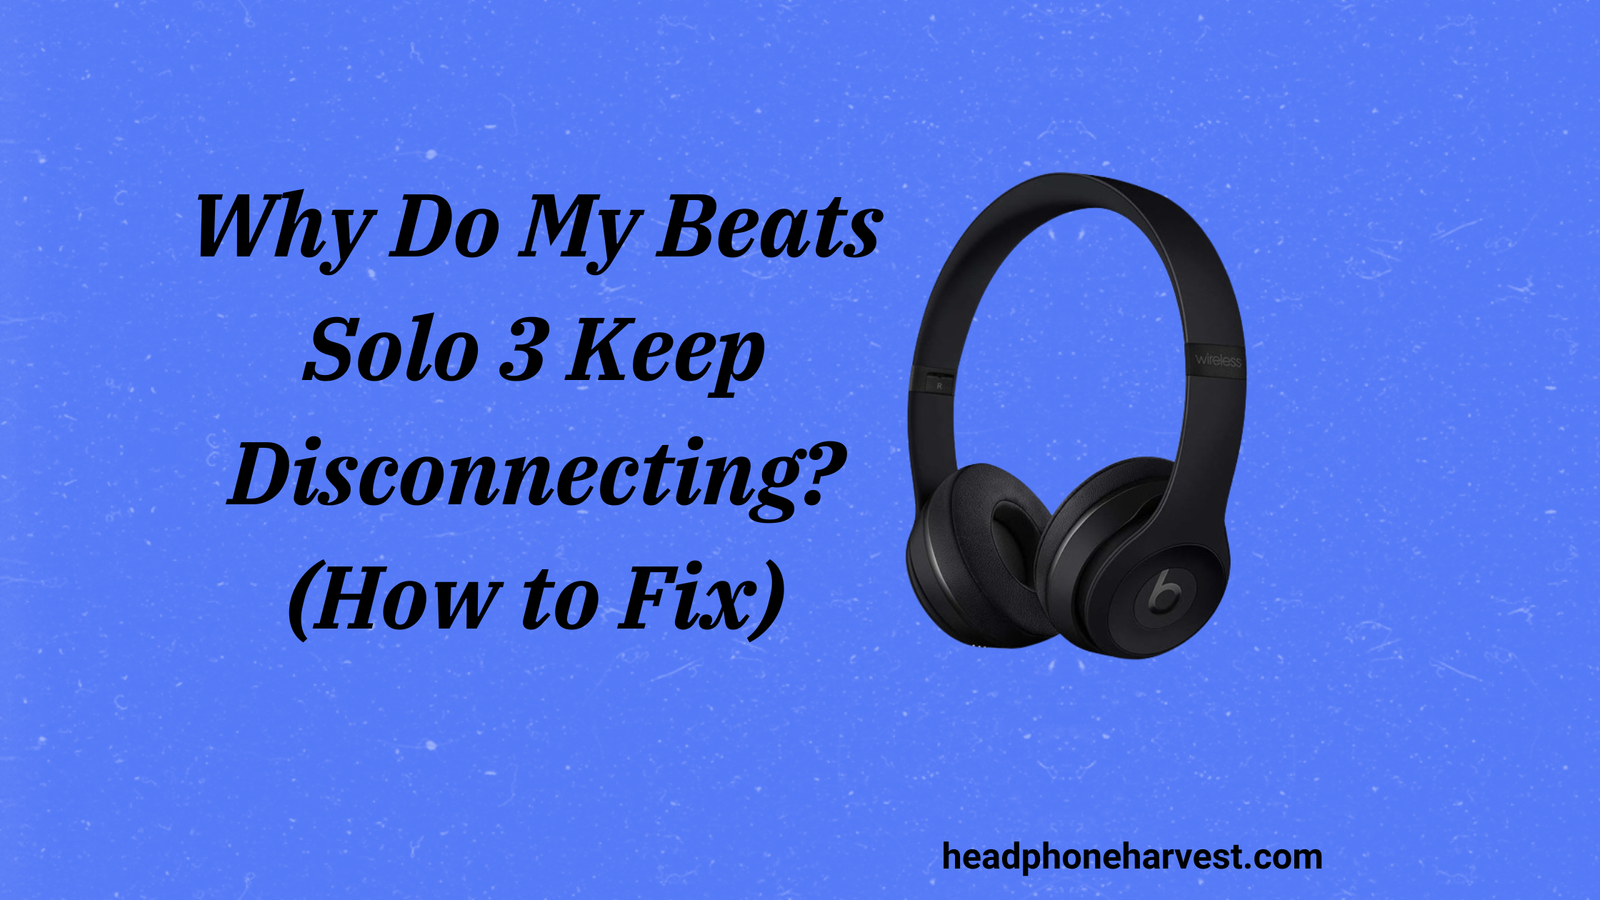 Why Do My Beats Solo 3 Keep Disconnecting? (How to Fix)